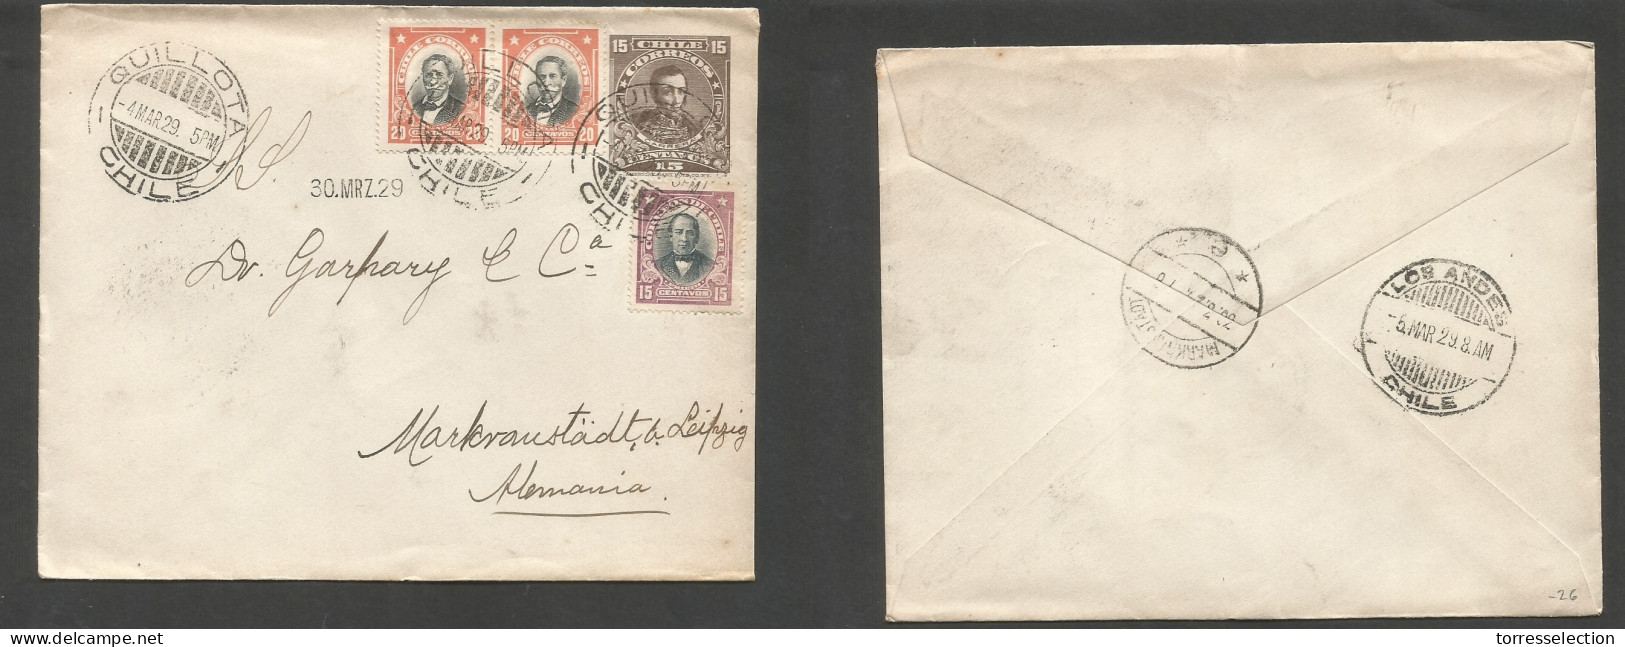 CHILE - Stationery. 1929 (4 March) Quillota - Germany, Mankvanstadt (30 March) 15c Brown + 3 Adtls Stat Env, Cds At 70c  - Cile